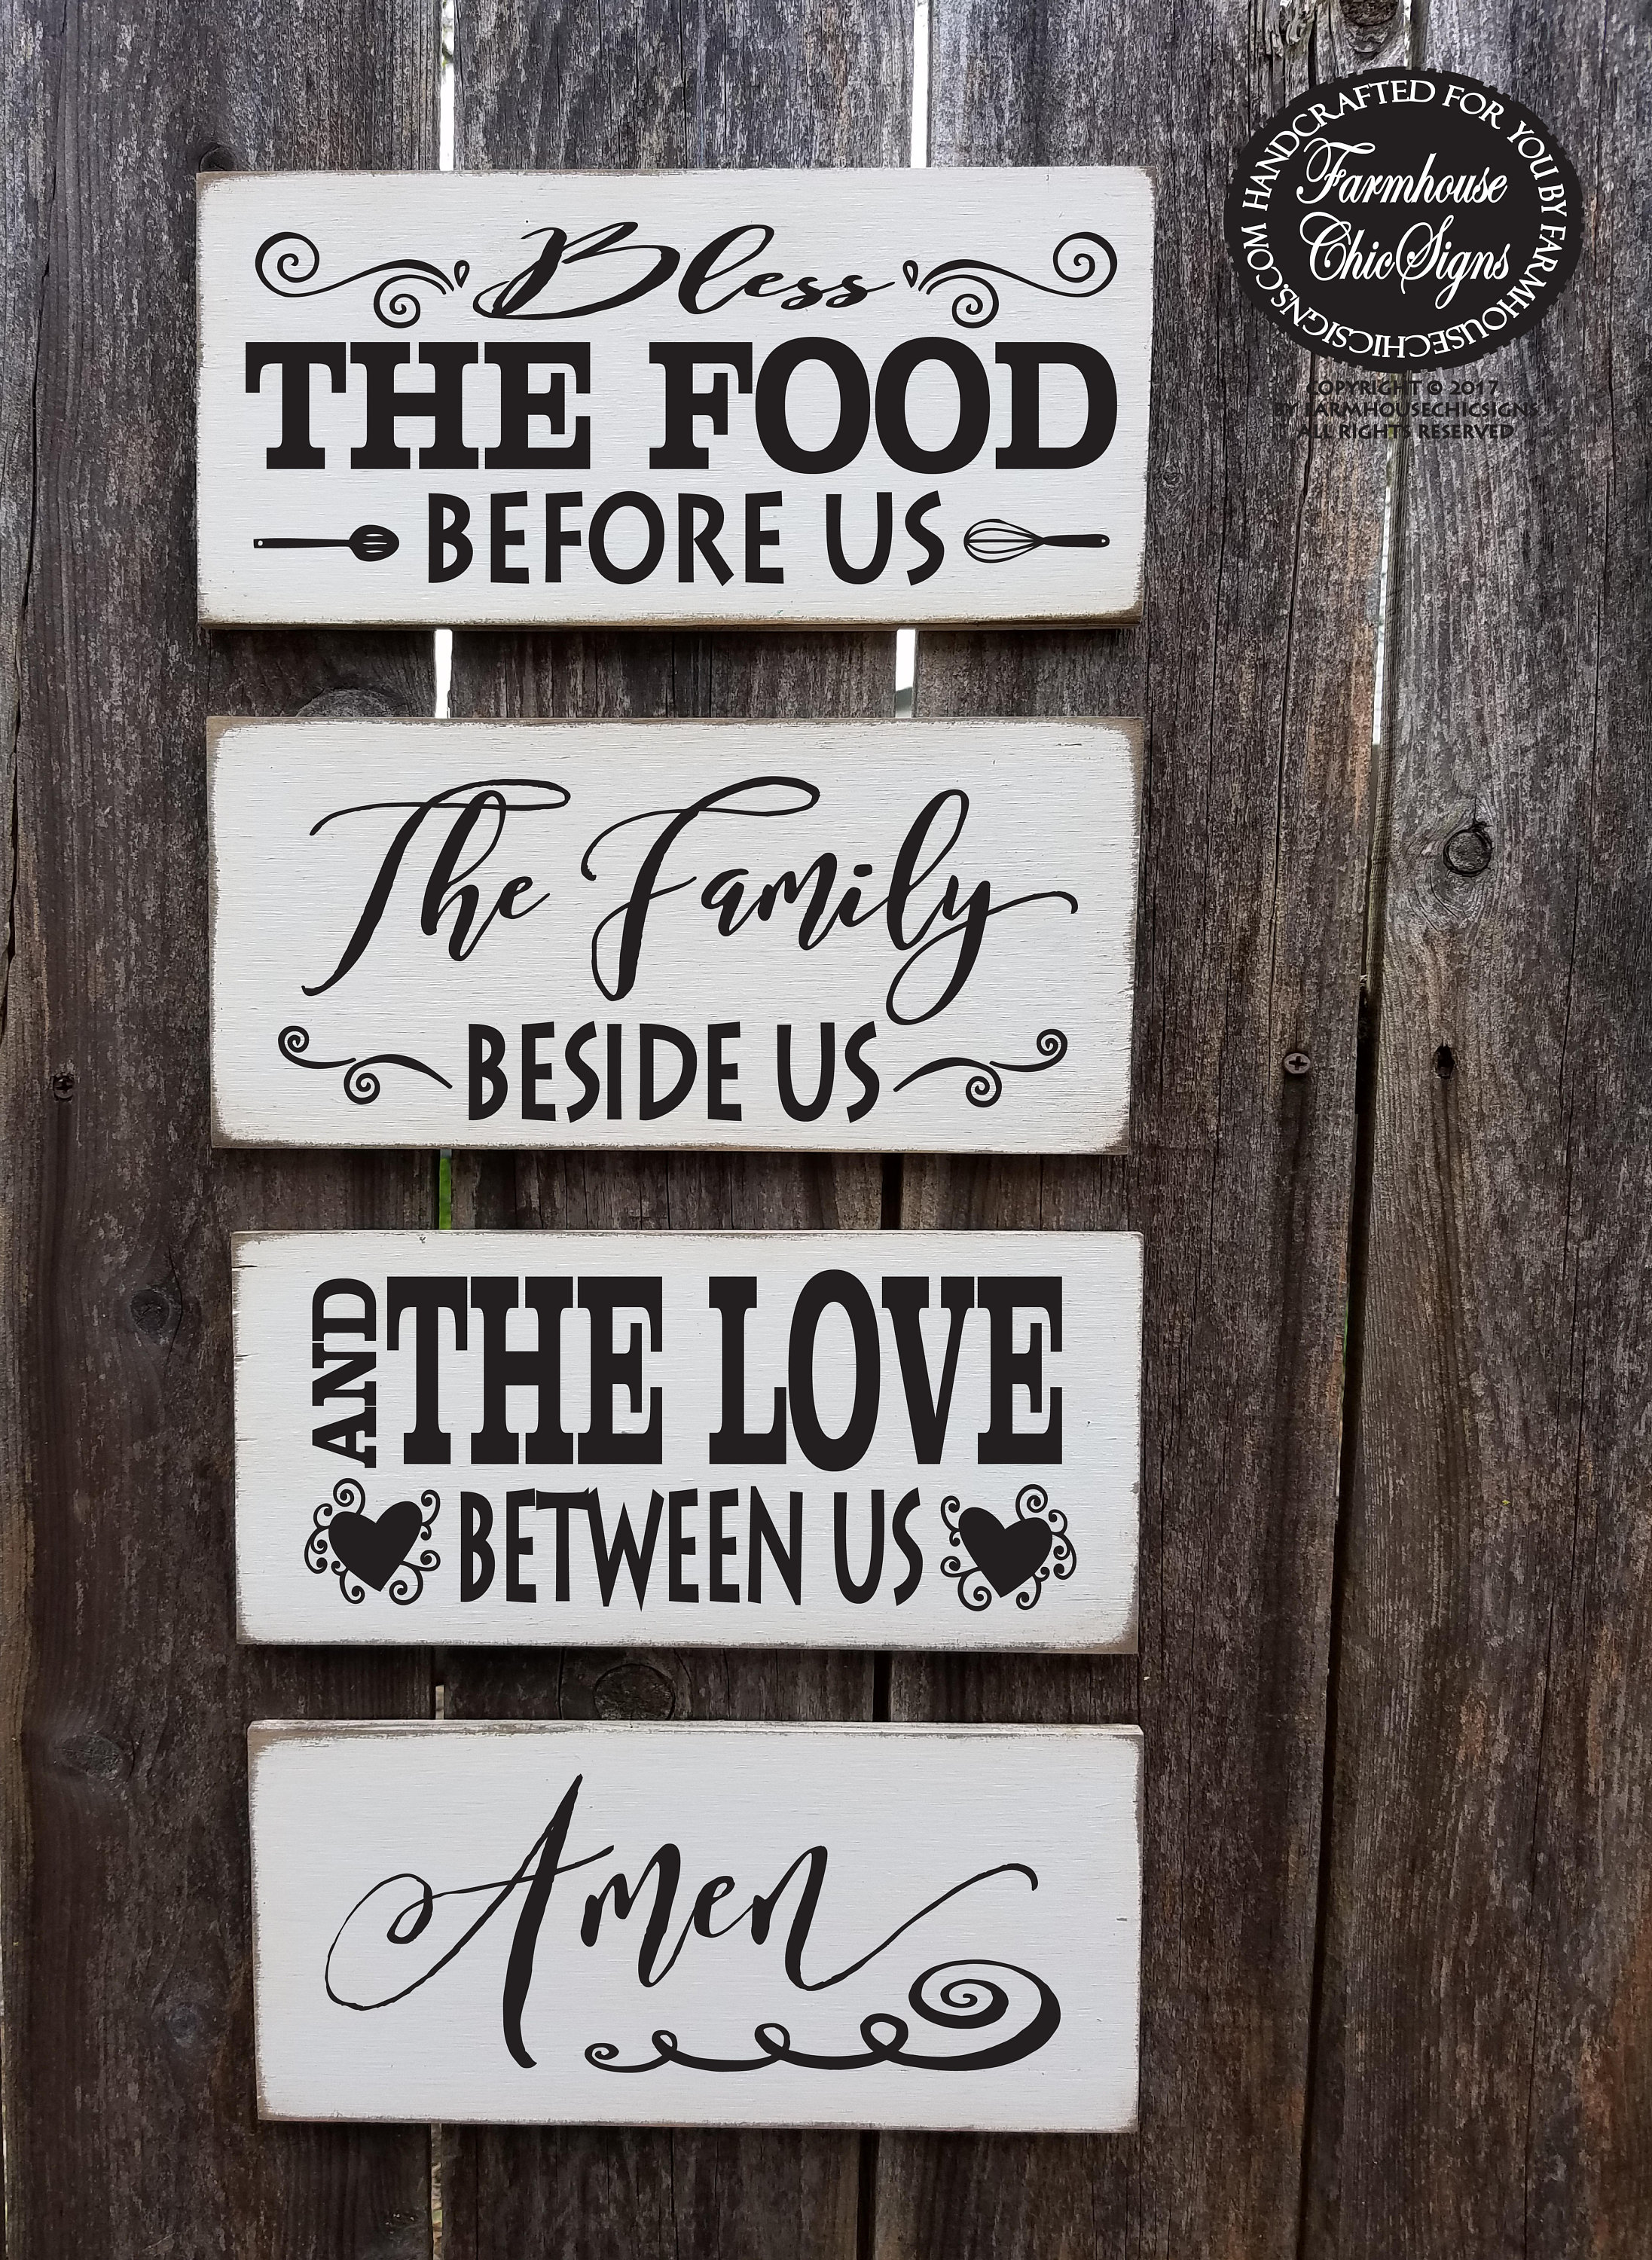 KITCHEN CLOSED country kitchen plaque rustic farmhouse wall decor wooden sign 